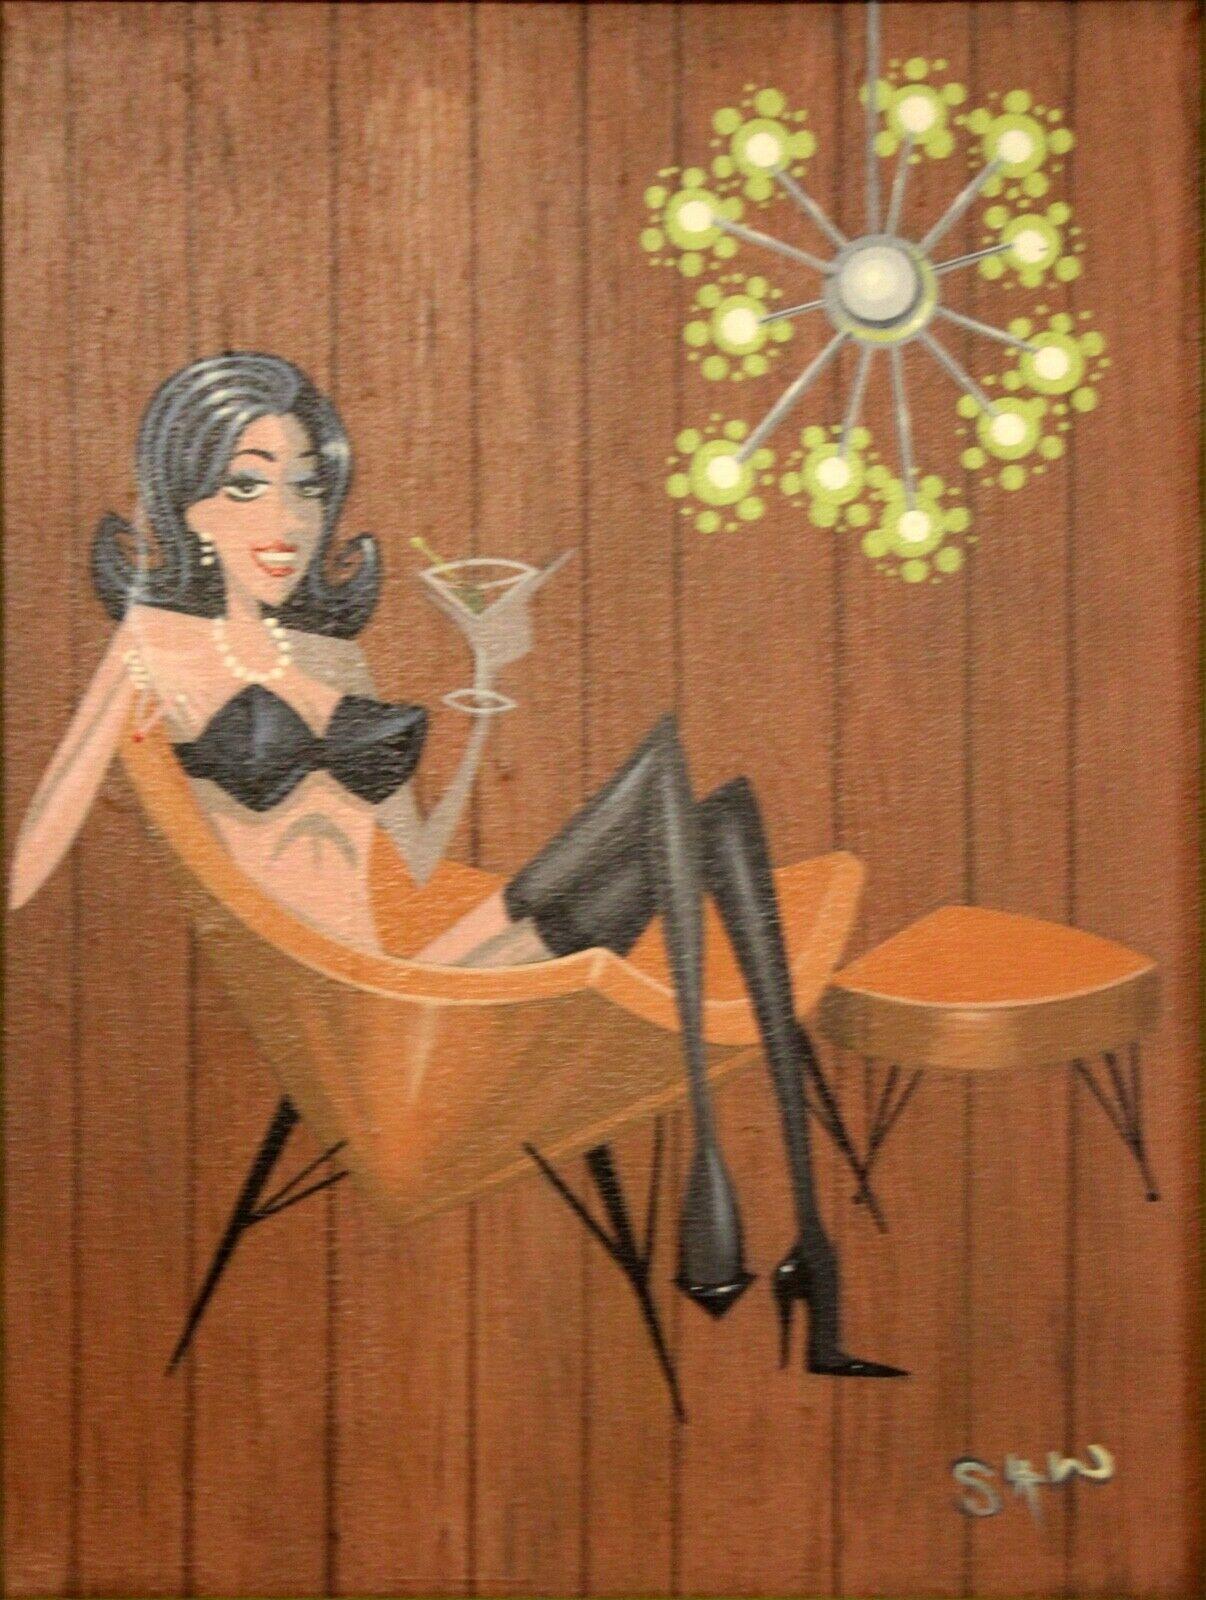 We in Michigan are offering this Classic Mid-Century Modern inspired painting depicting a seductive, martini-drinking, temptress titled 